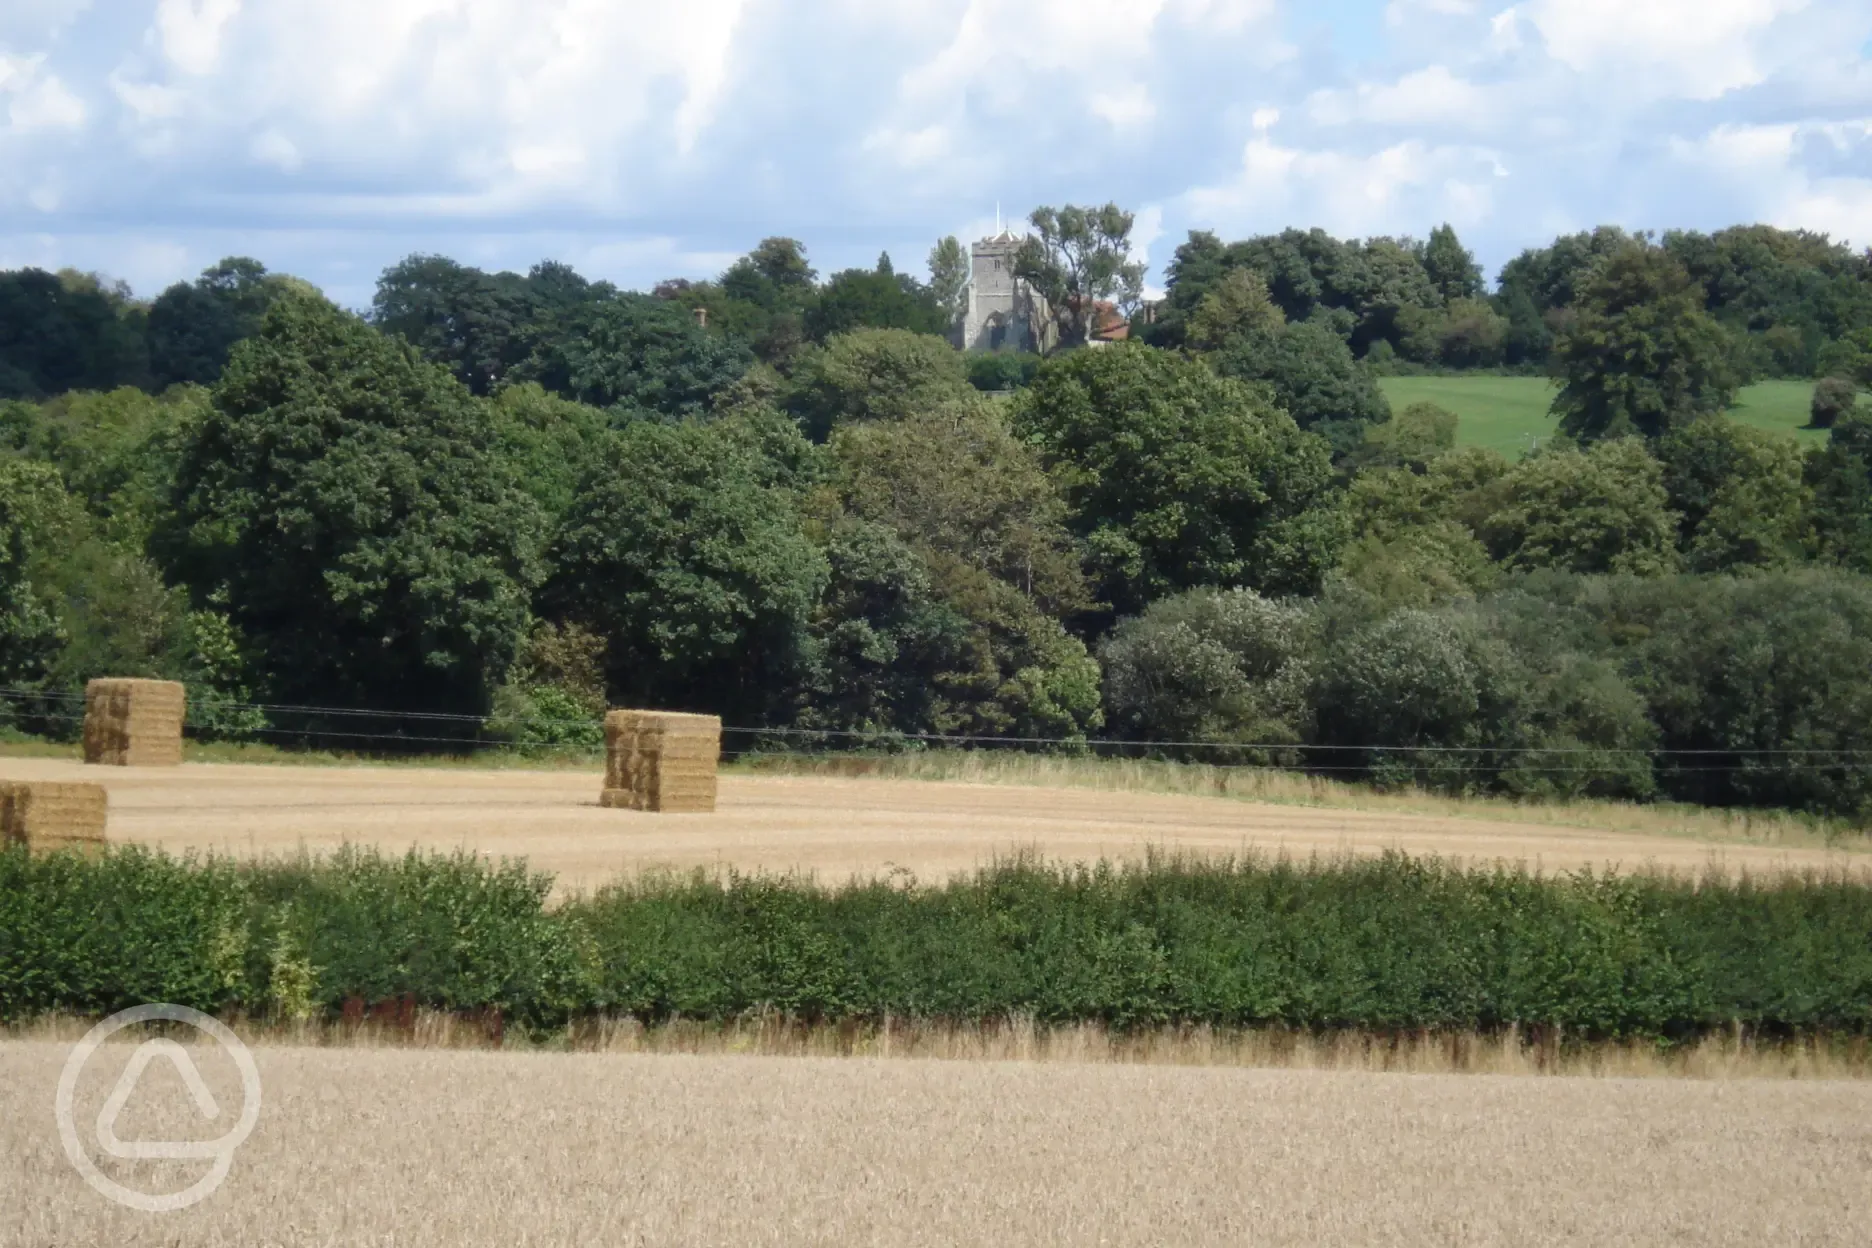 Not far across the fields to the village